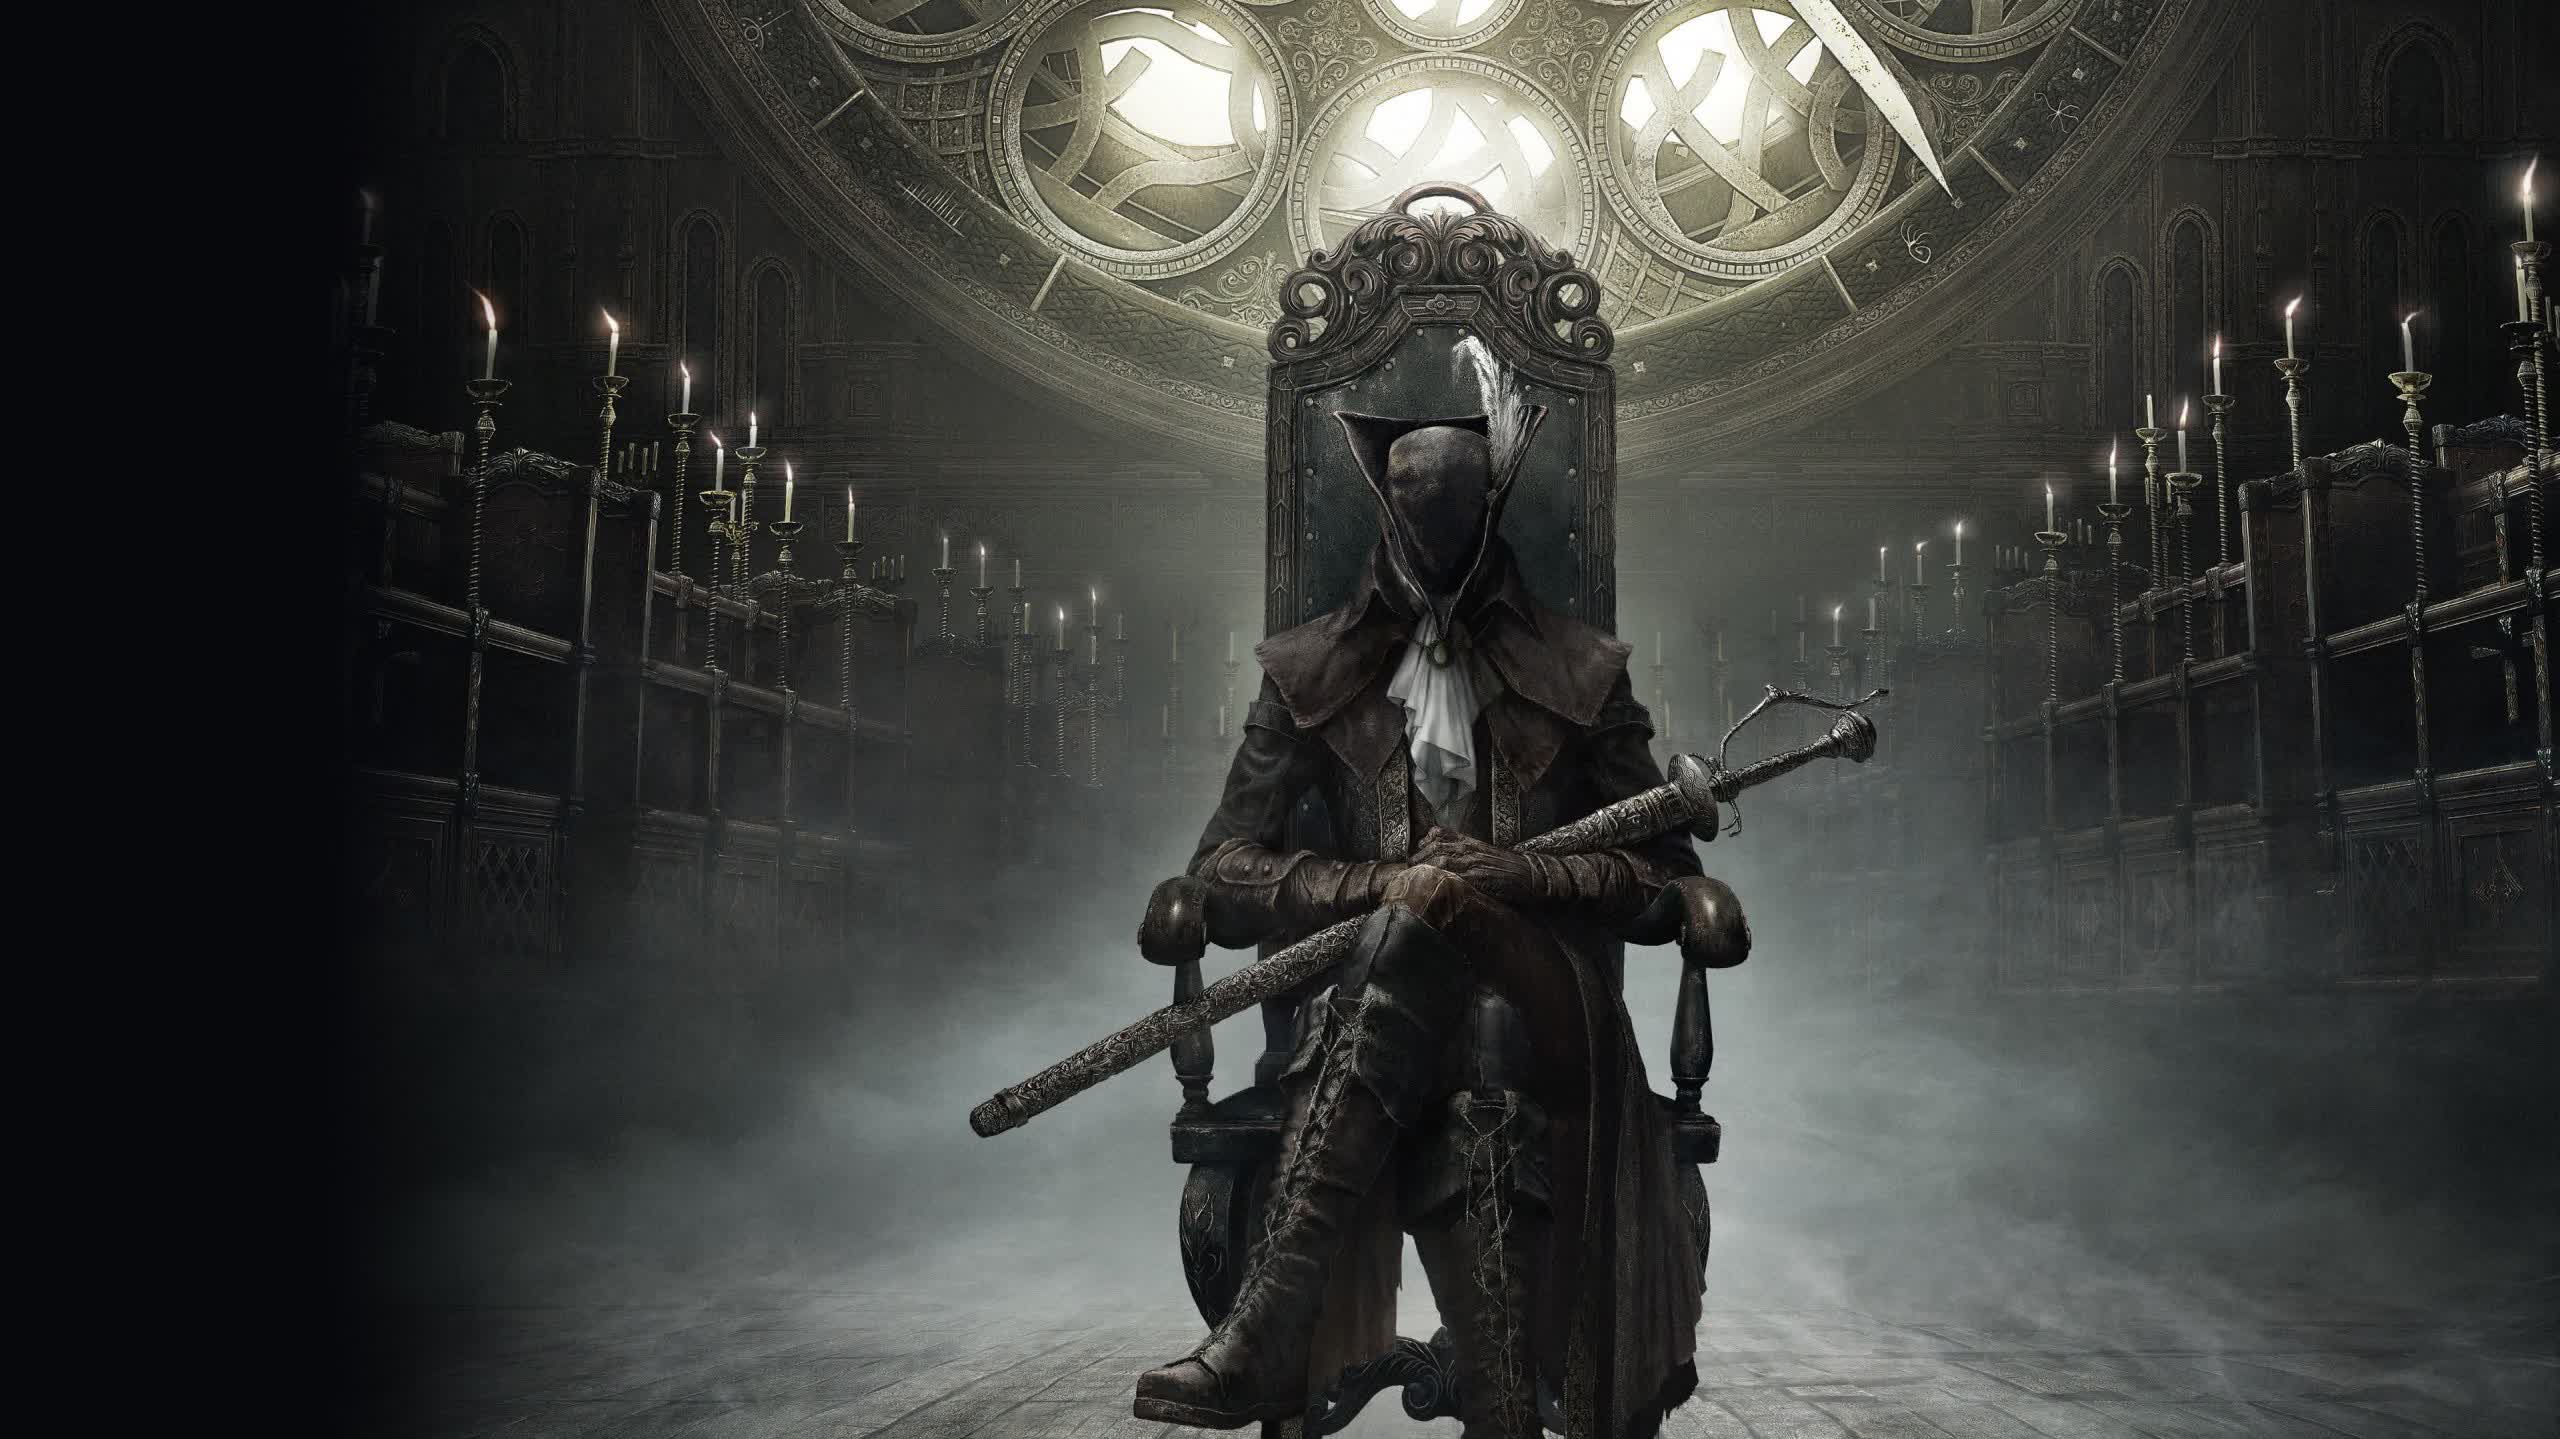 Bluepoint reportedly has a Bloodborne remaster and a sequel in the works for PlayStation 5